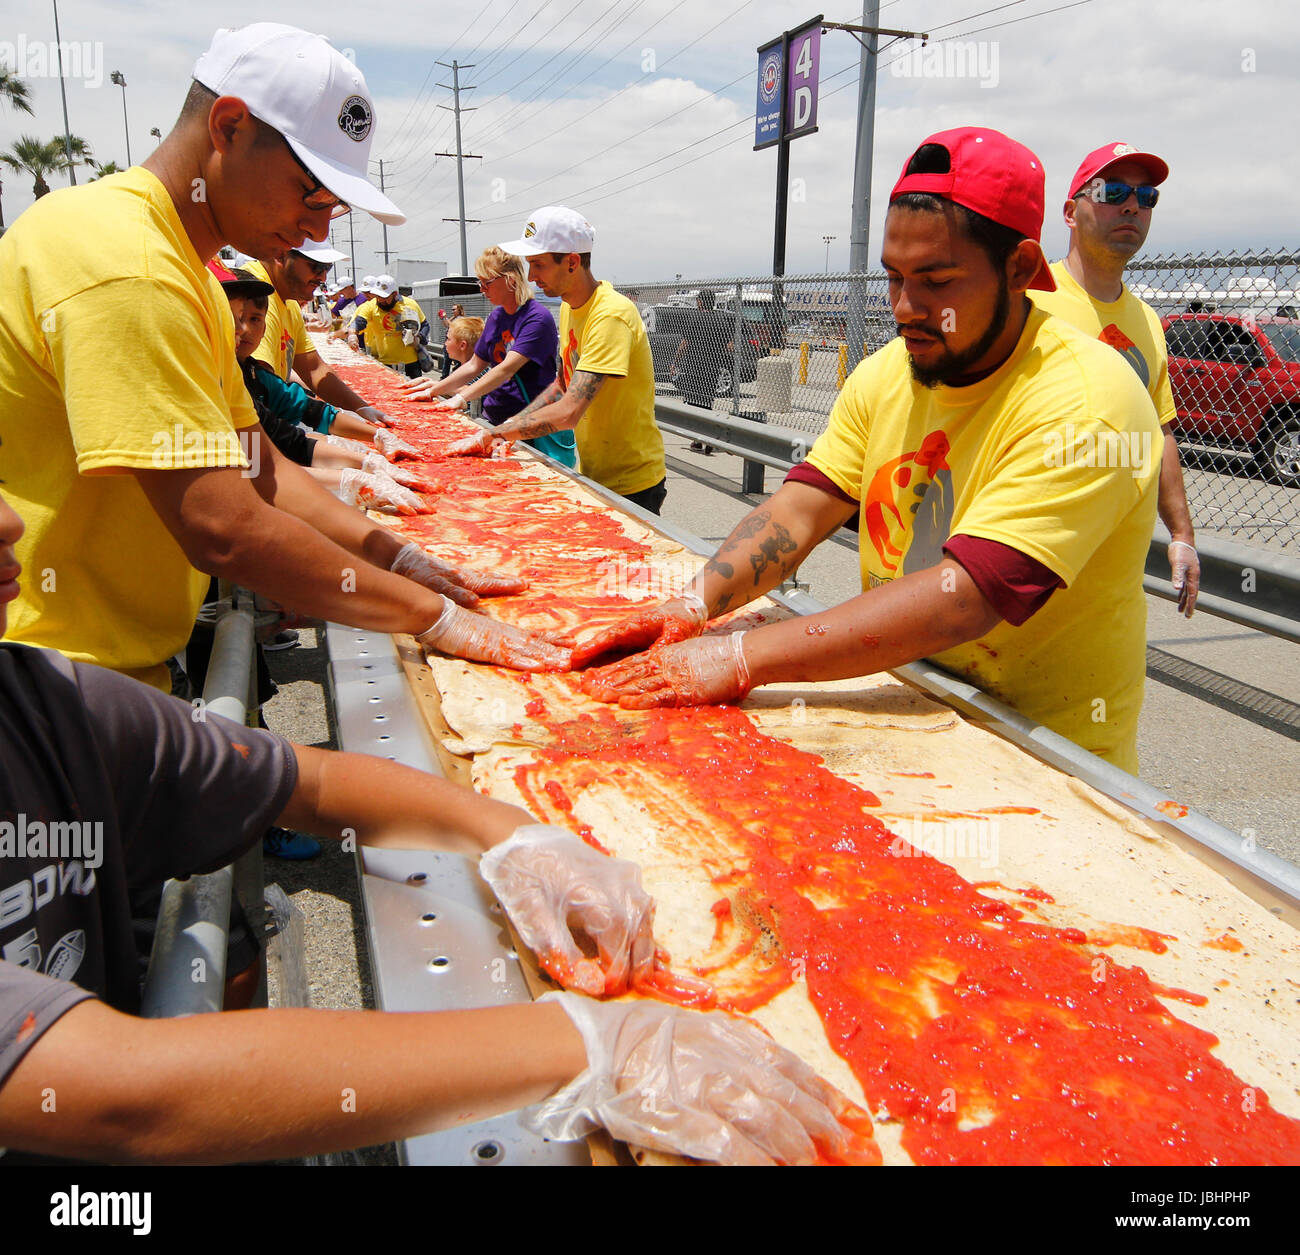 June 10, 2017. Fontana CA. The worlds longest pizza makes it into the Guinness Book of World Records as the 1.3 mile(6,820 ft) long pizza event took place at the Auto Club Speedway in Fontana California Saturday. The cooking of the pizza started at 11am and finish at 4pm outside the race track. The making of the pizza started Friday at 7pm with the pizza dough being made, cook and laid out along a 1.3 mile lone table. The making of the pizza consist of 530 gallons of tomato sauce, 20,000 pounds of dough, 15,000 pounds of cheese, 1.3 mile long table, 3 mobile pizza ovens, hundreds of pizza box Stock Photo